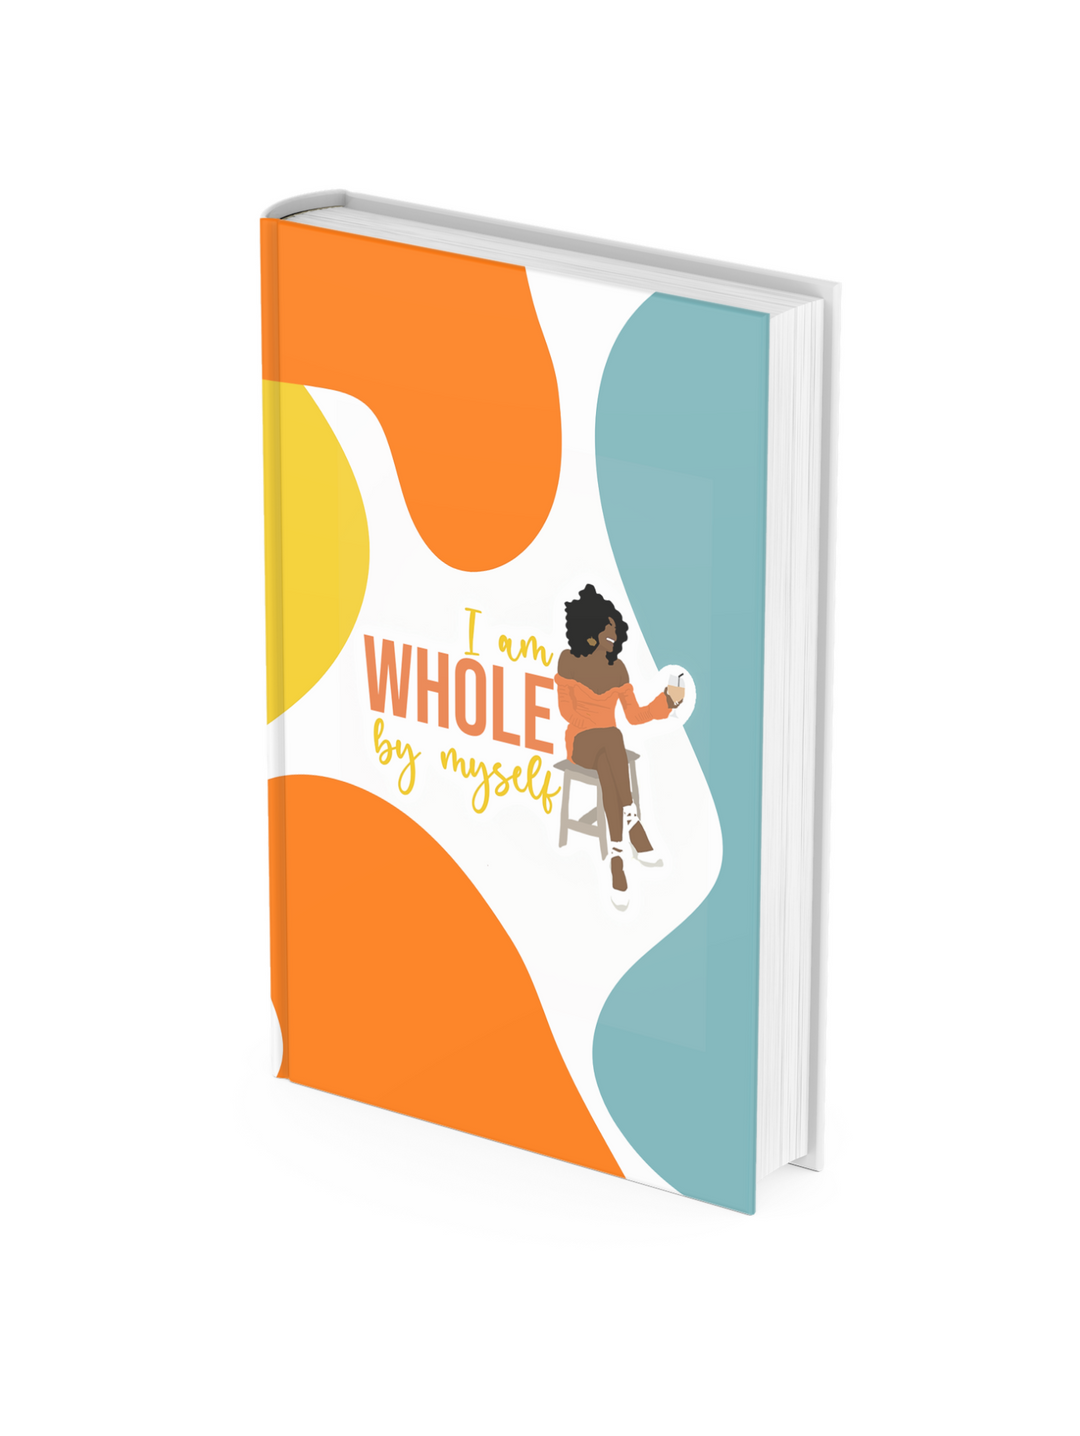 I Am Whole By Myself Notebook: Wide Ruled 100 Pages